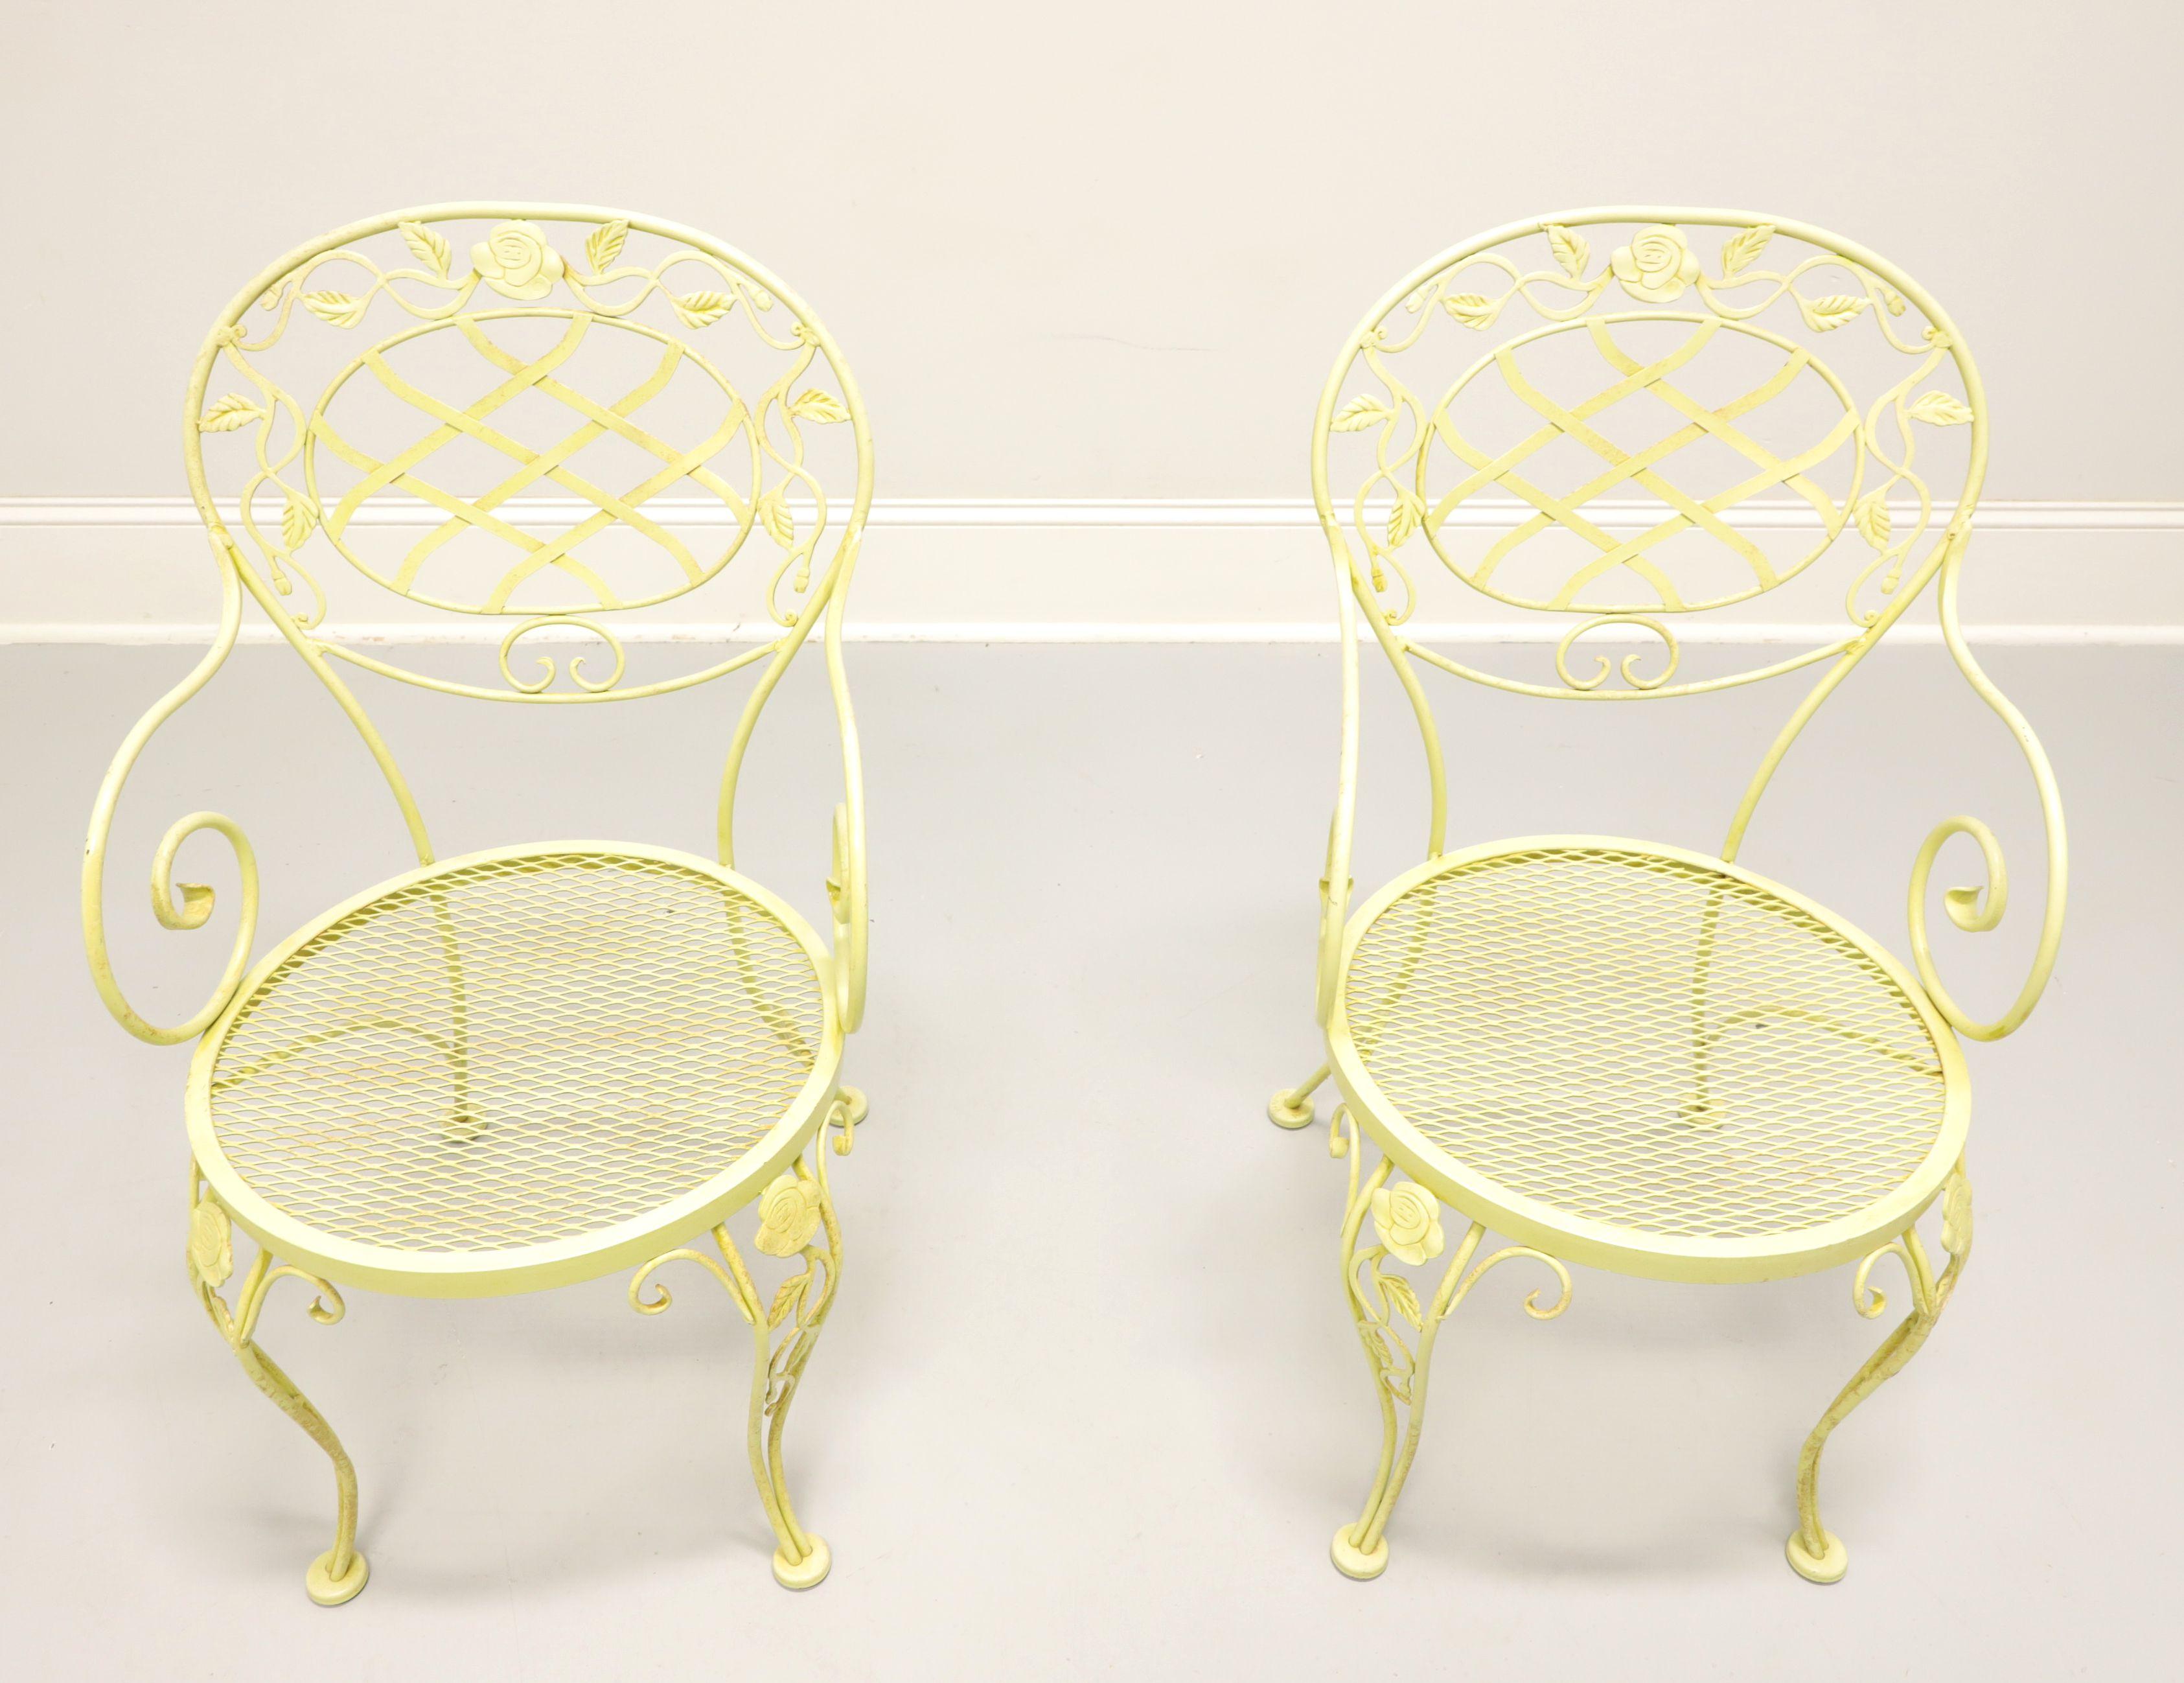 A pair of Mid 20th Century wrought iron patio armchairs in the Regency style by Woodard Furniture, their Chantilly Rose. Wrought iron metal frame, yellow painted finish, rounded back with lattice design center, roses & leaves adornments, rounded